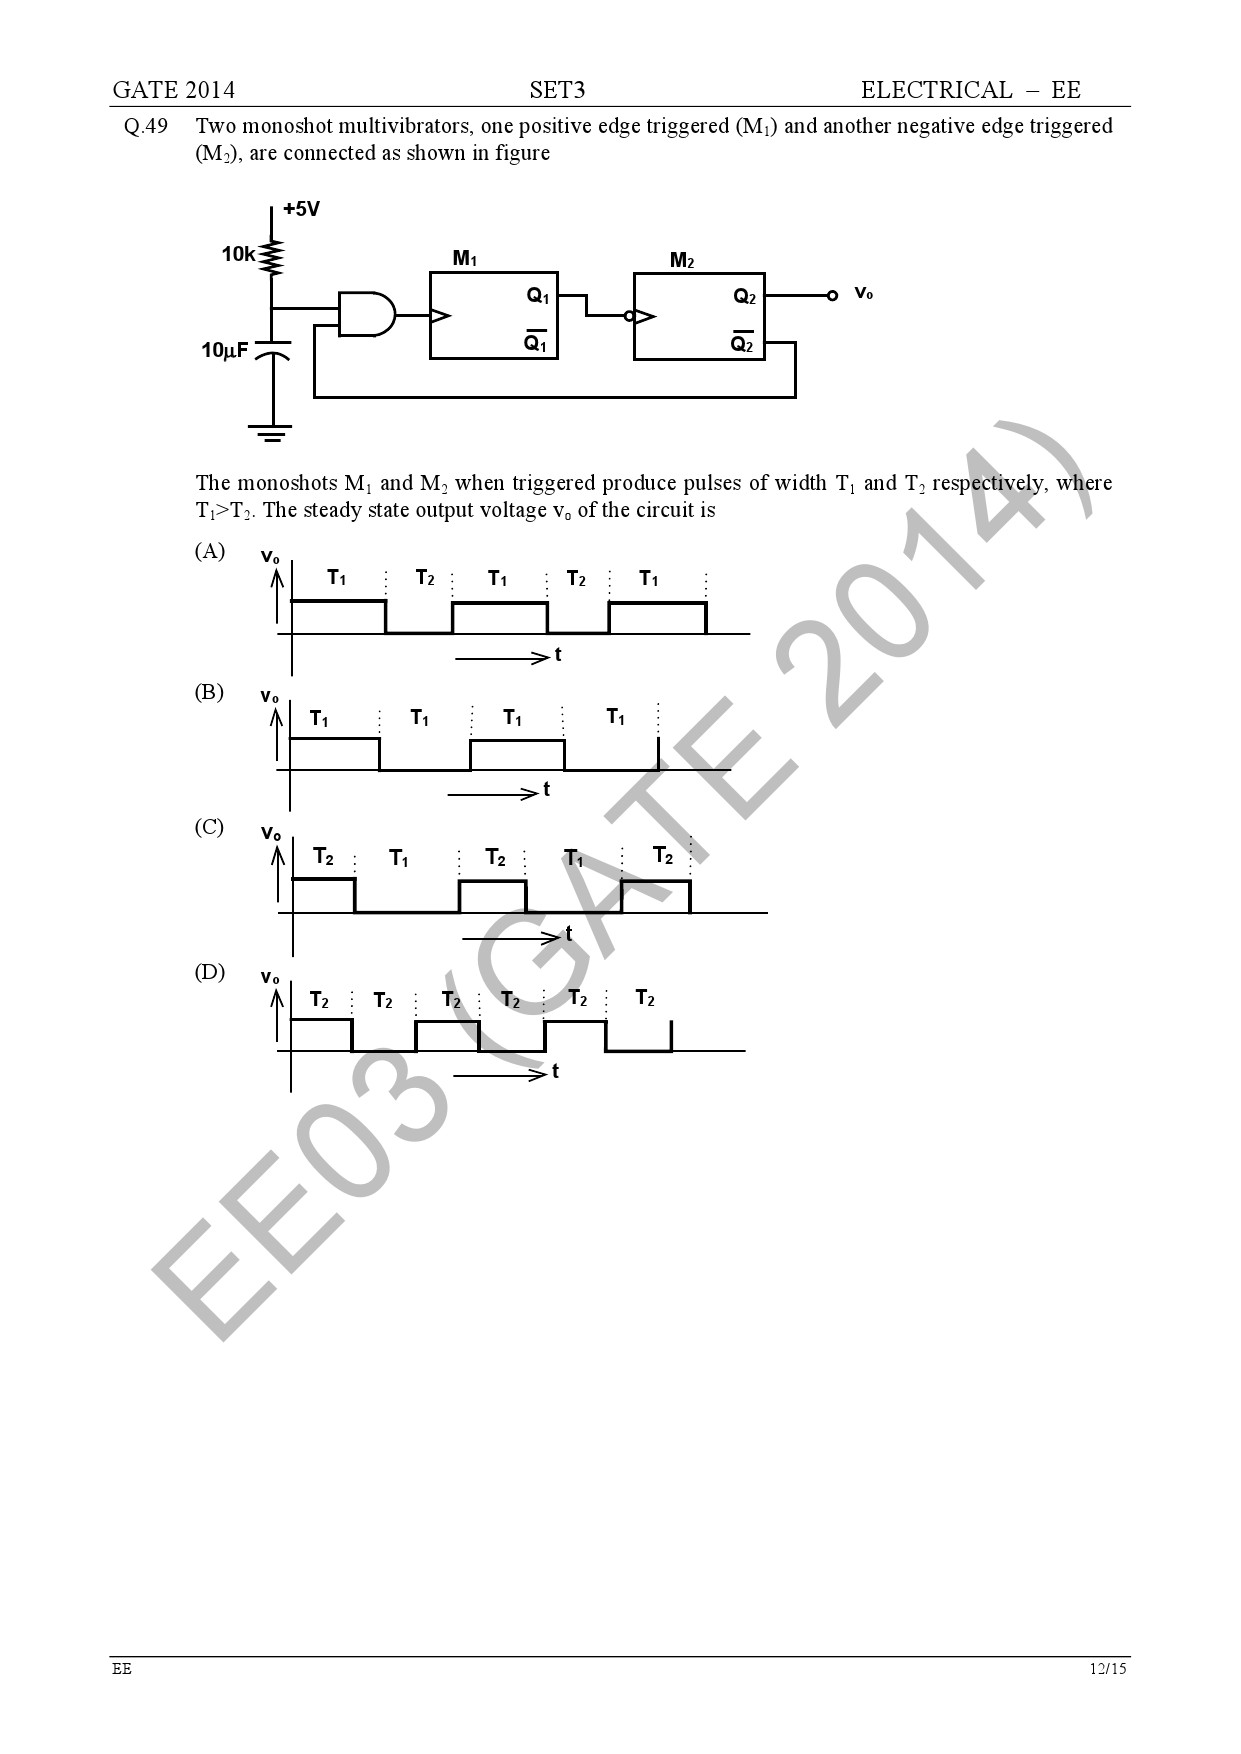 GATE Exam Question Paper 2014 Electrical Engineering Set 3 18